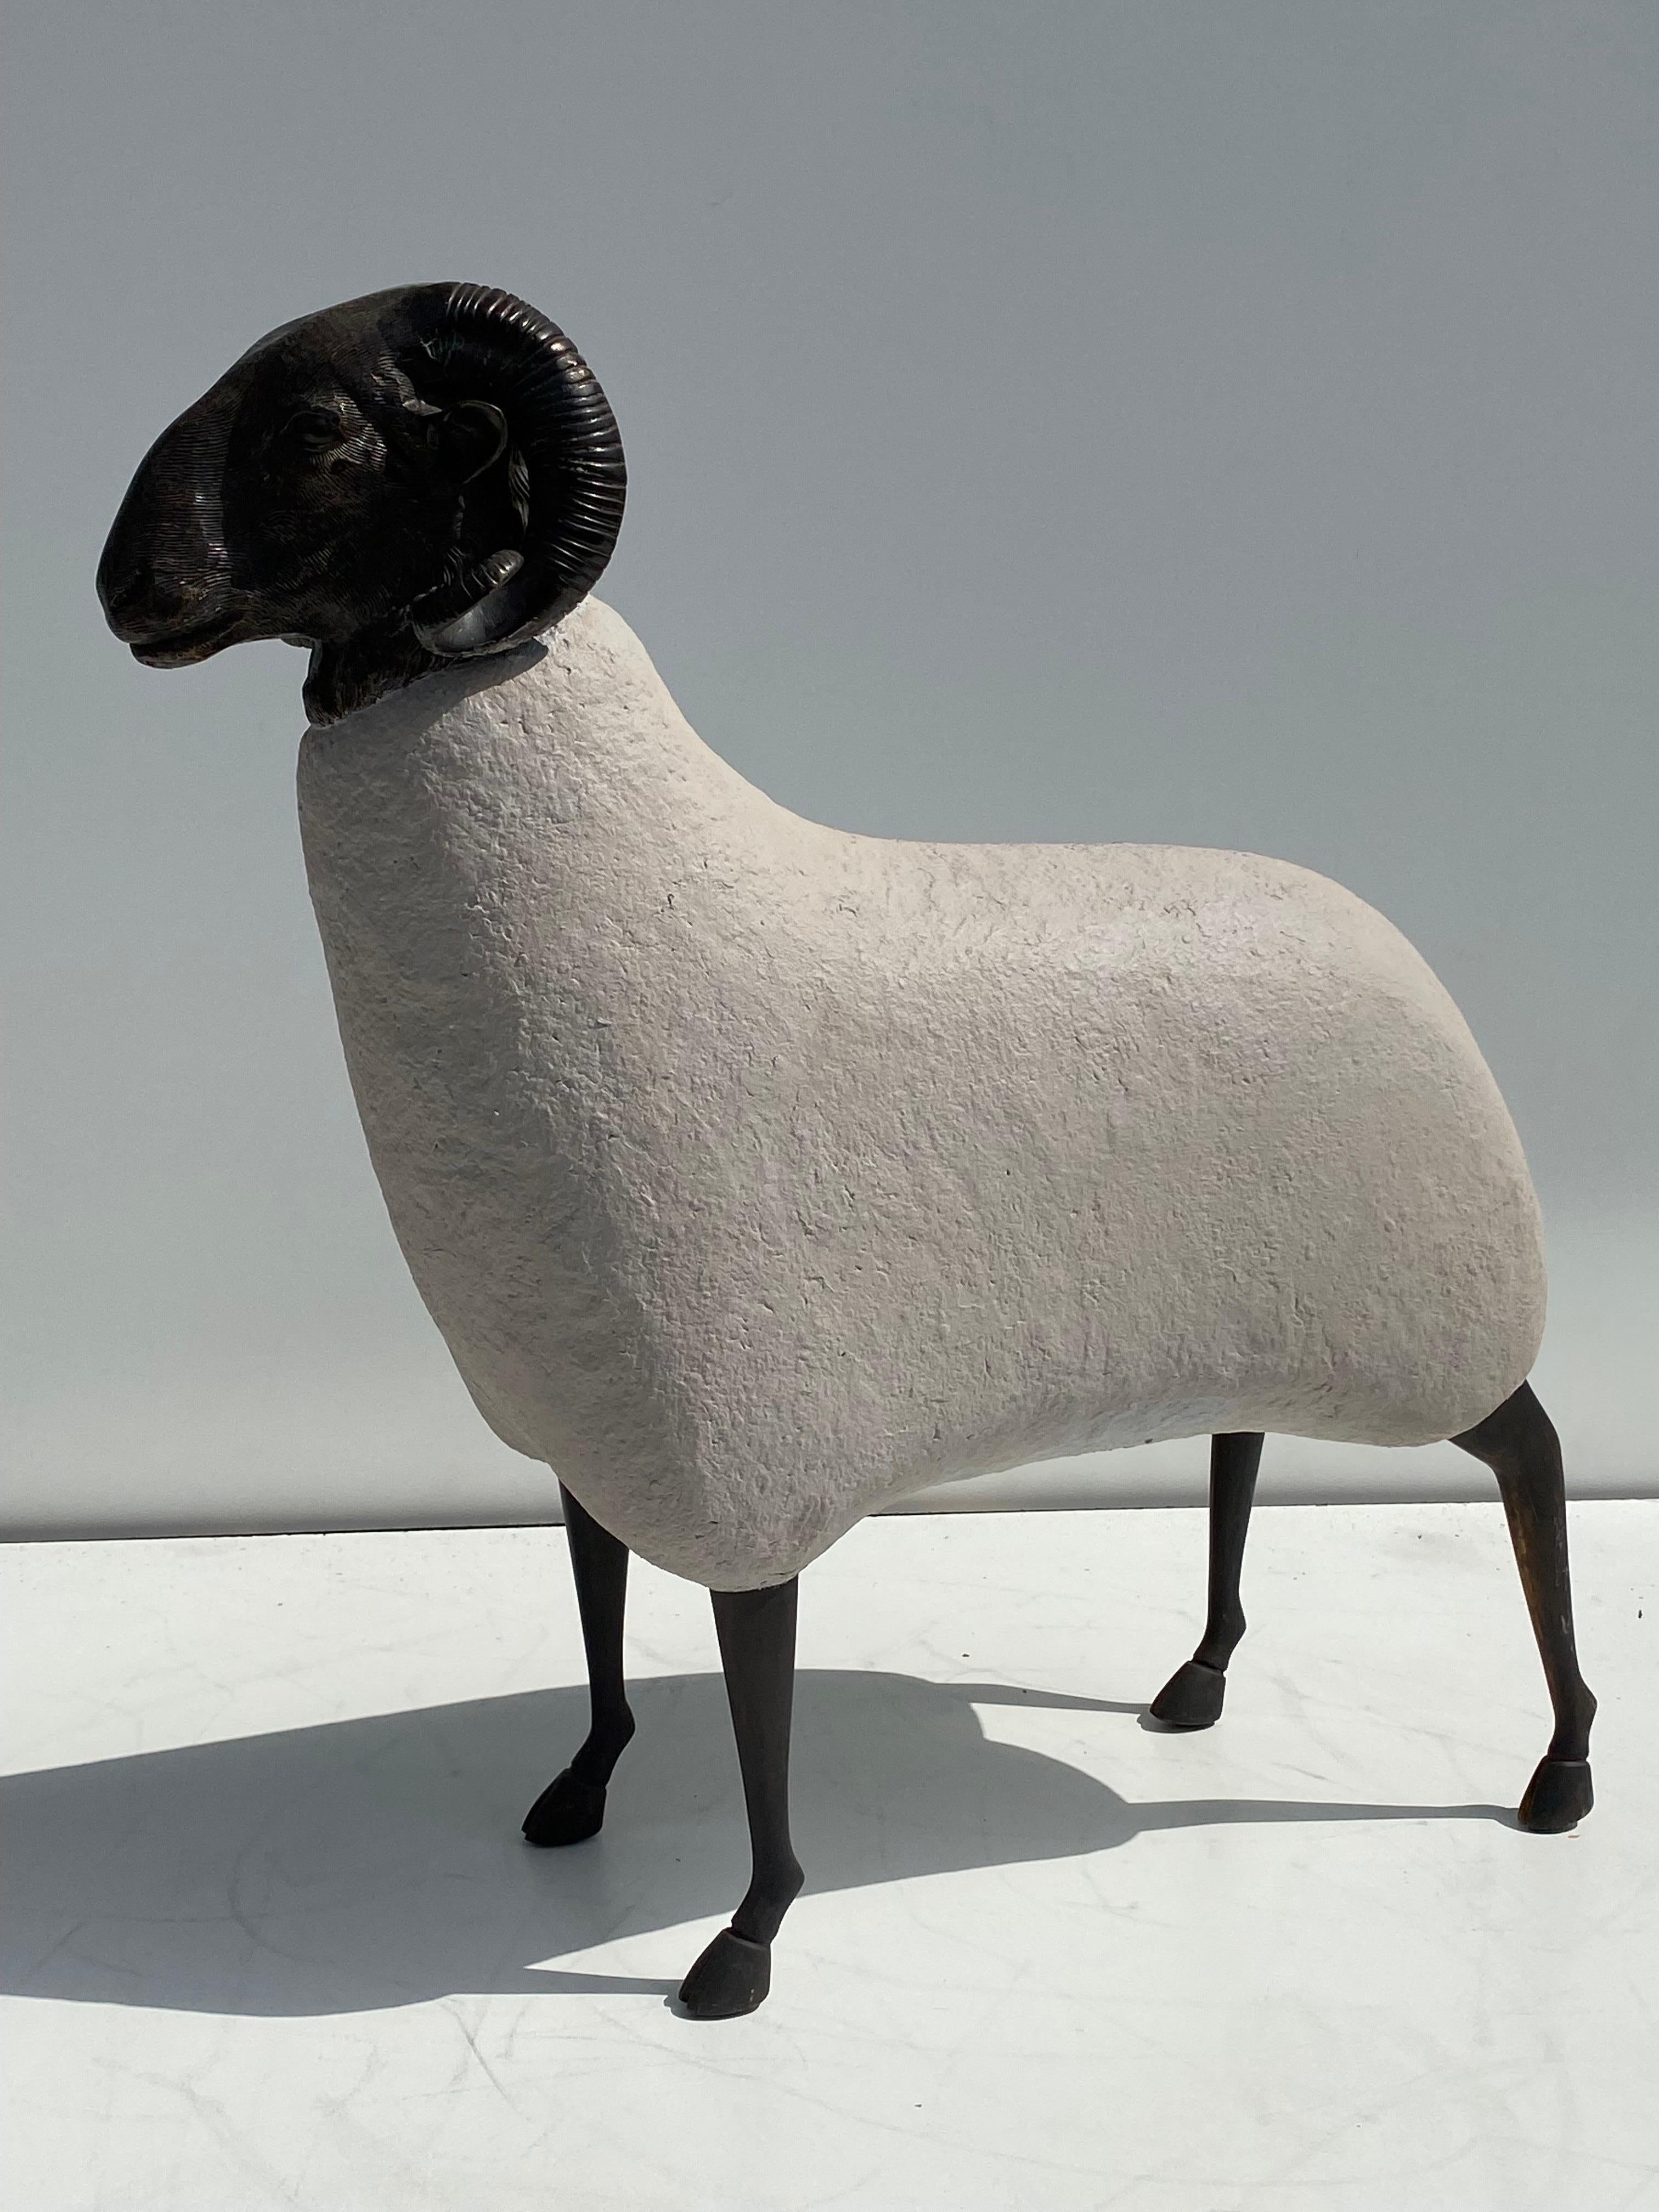 Patinated brass and faux concrete sheep / ram sculpture. Suitable for outdoors but not advised to leave under direct rain for a long period of time.